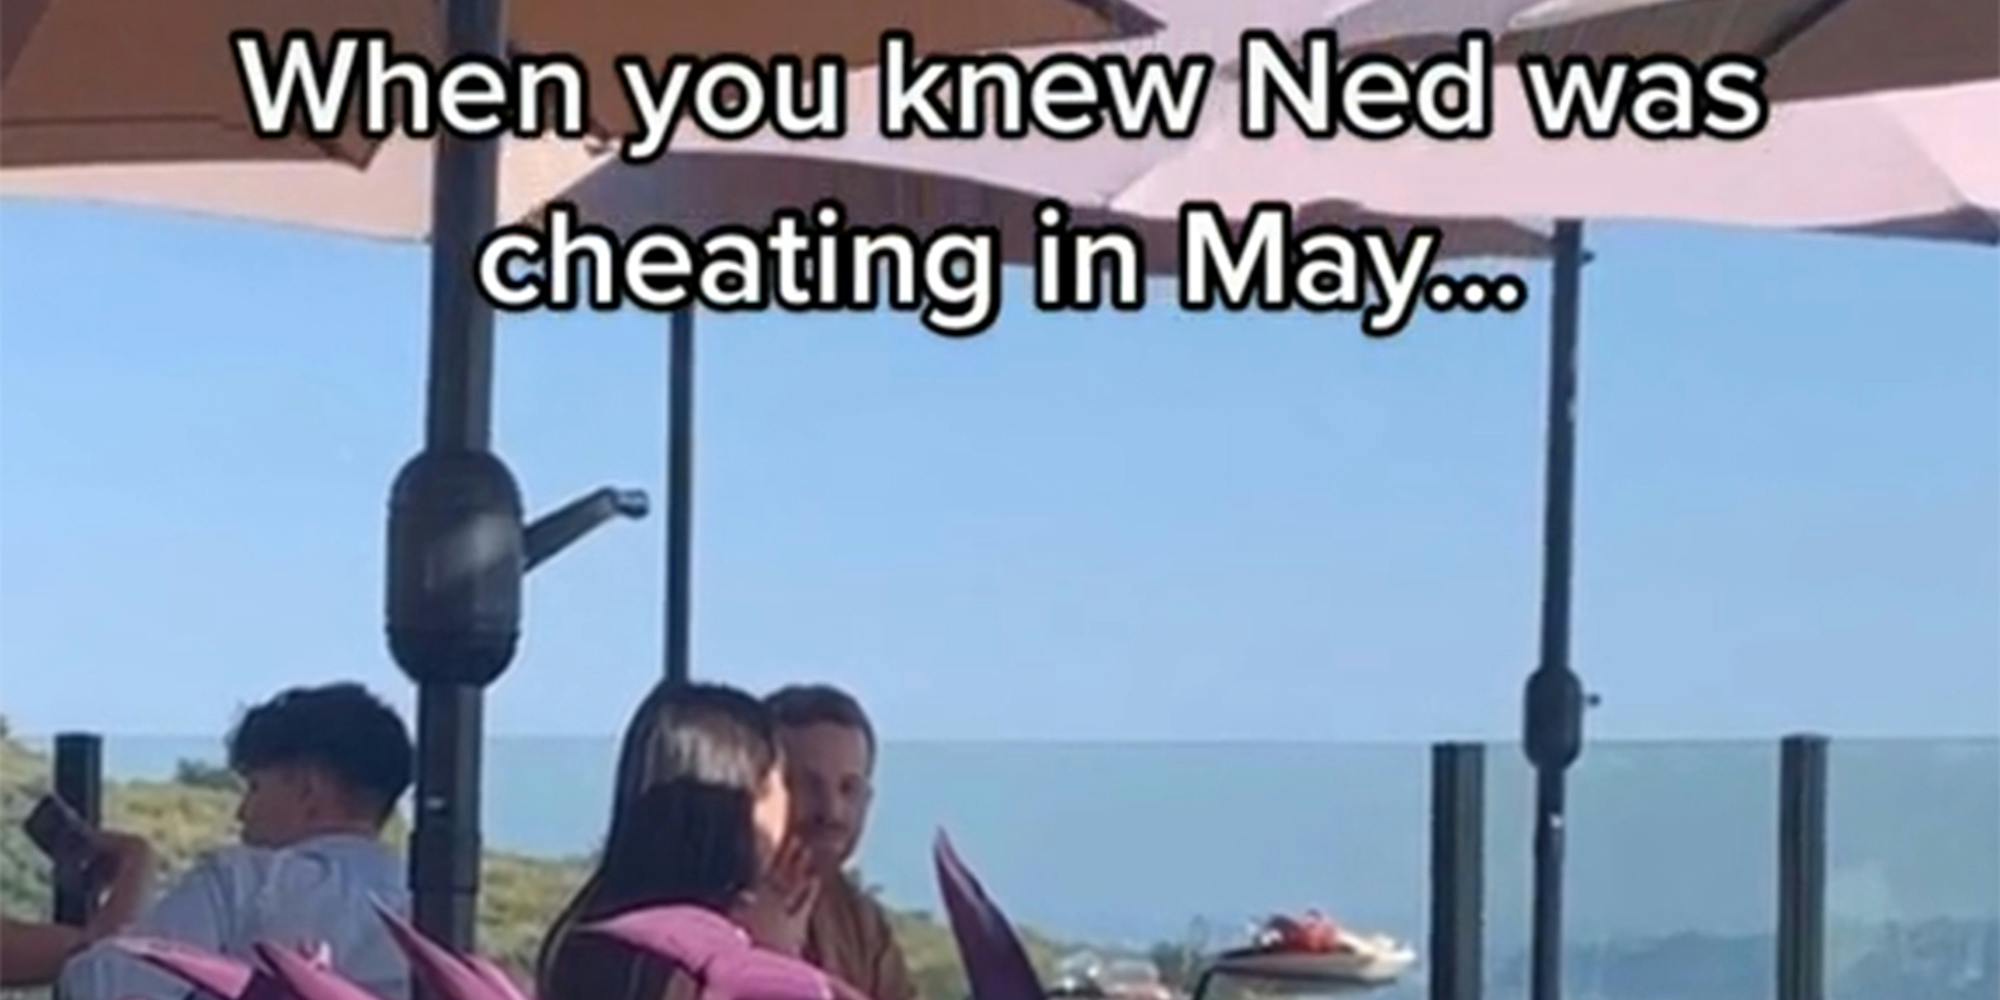 people sitting outside at a restaurant with caption "When you knew Ned was cheating in May..."